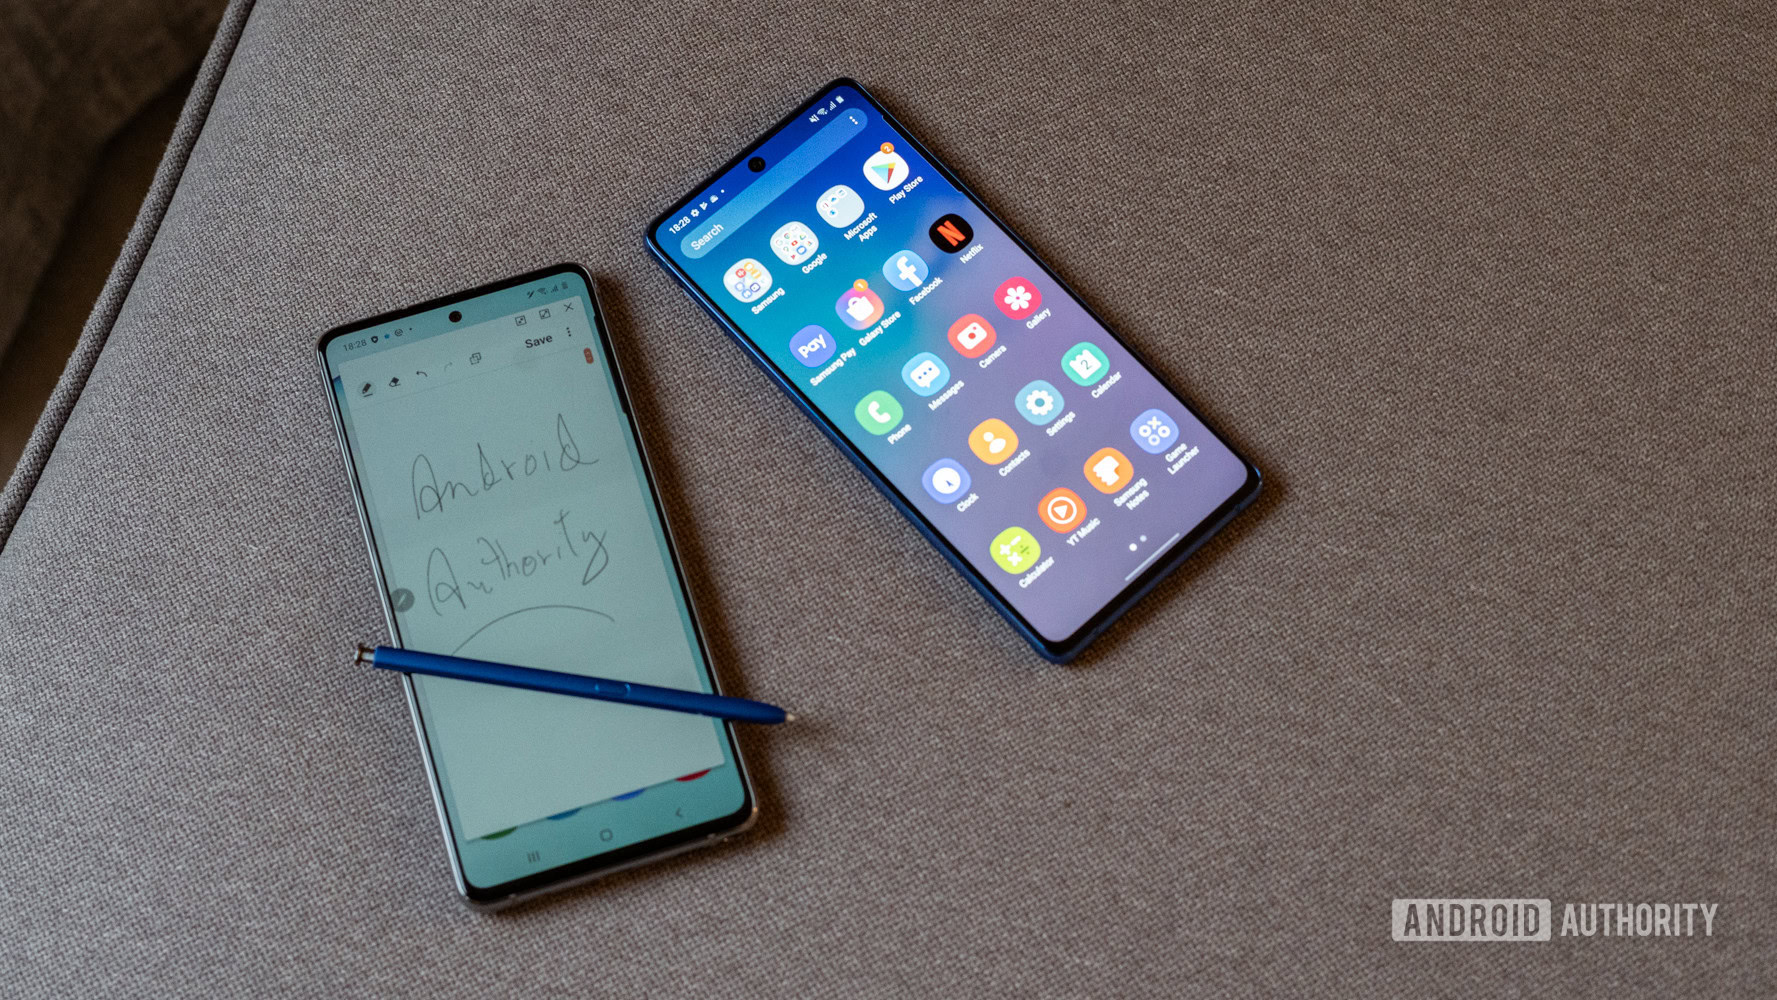 Note 10 vs 10 Lite and Galaxy S10 vs S10 Lite specs, features and price  comparison - PhoneArena